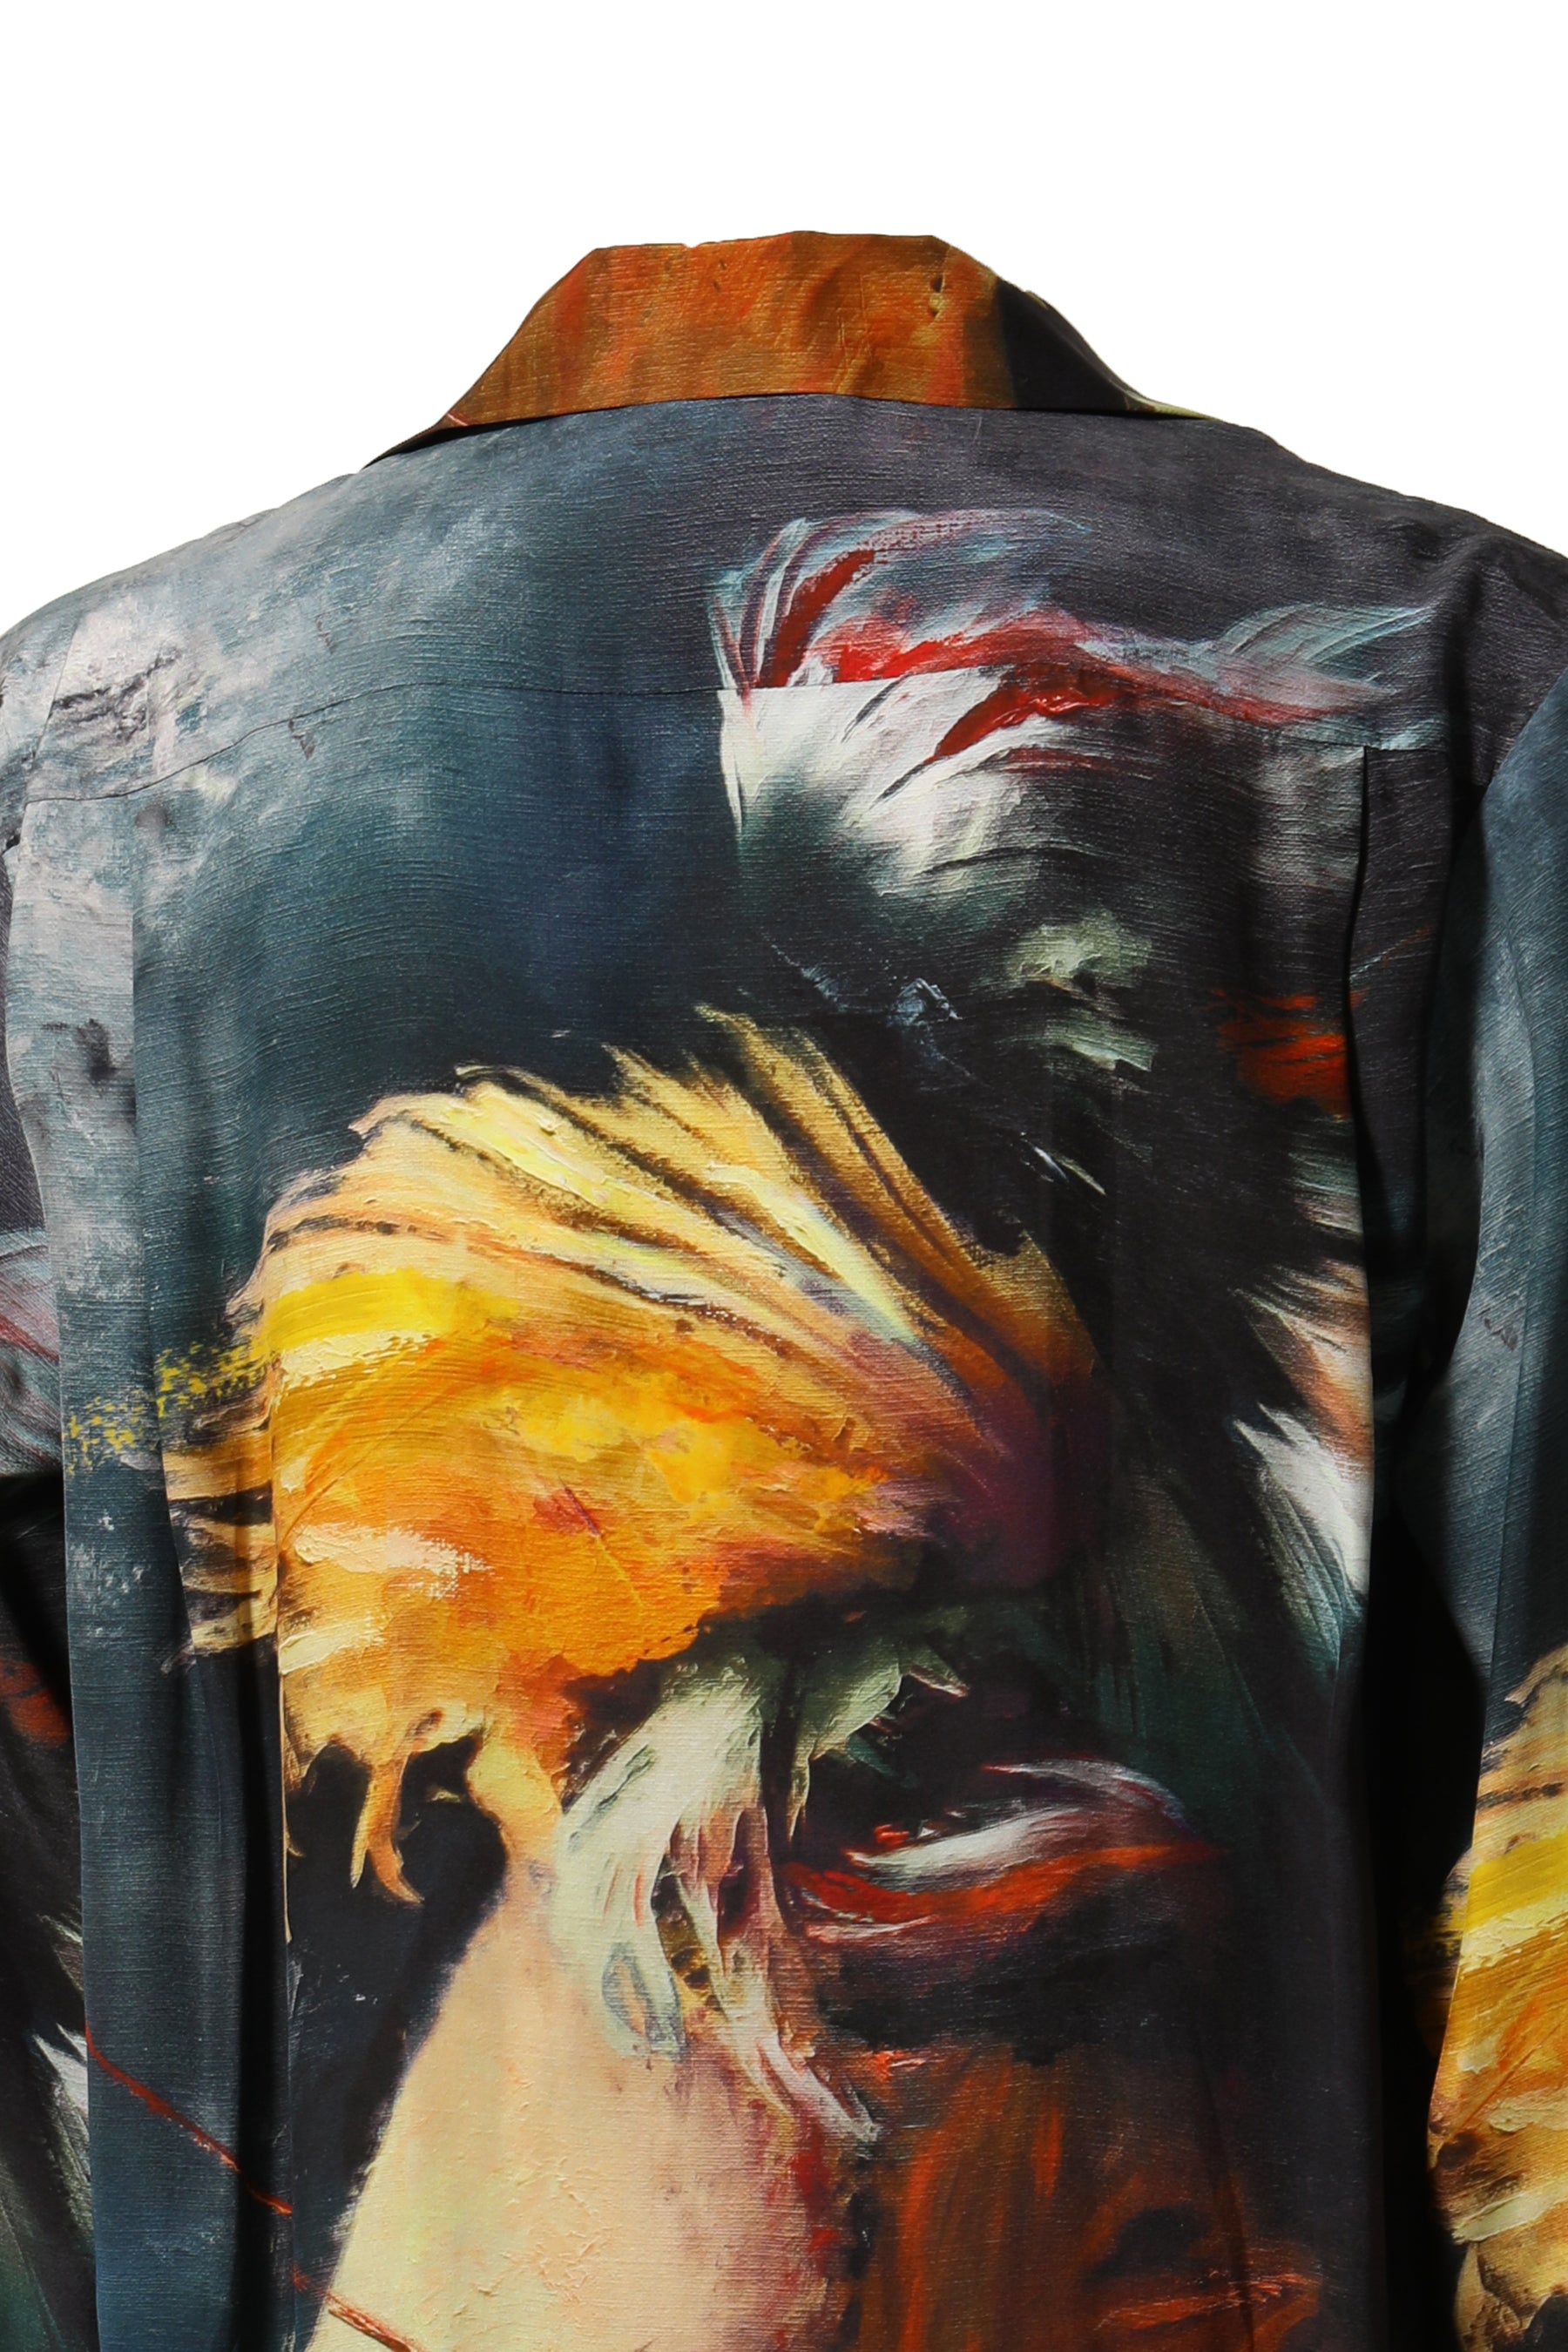 OIL PAINTING SHIRTS / BLK